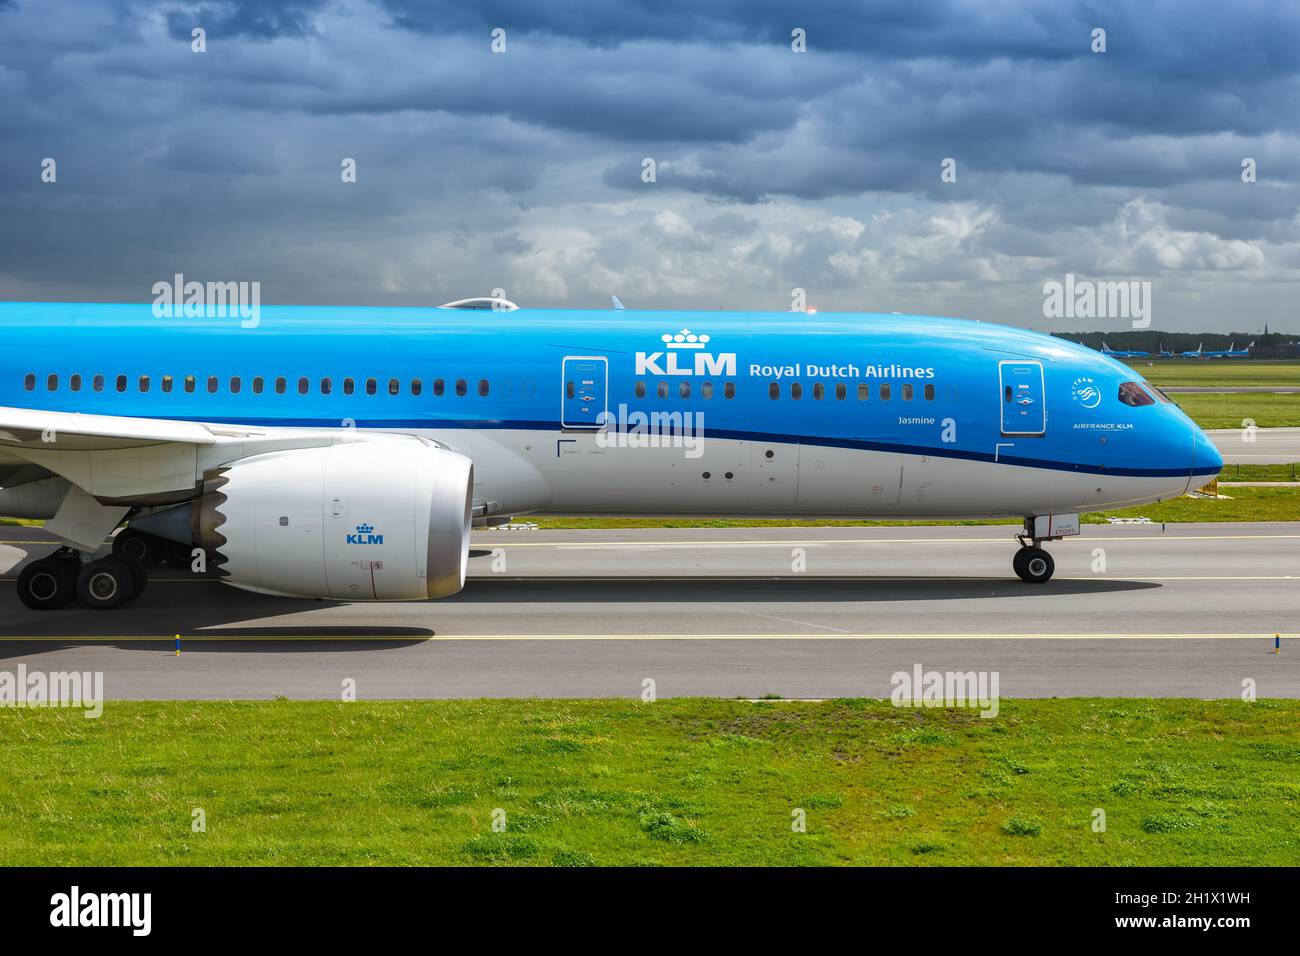 Amsterdam, Netherlands - May 21, 2021: KLM Royal Dutch Airlines Boeing 787-9 Dreamliner airplane at Amsterdam Schiphol airport (AMS) in the Netherland Stock Photo